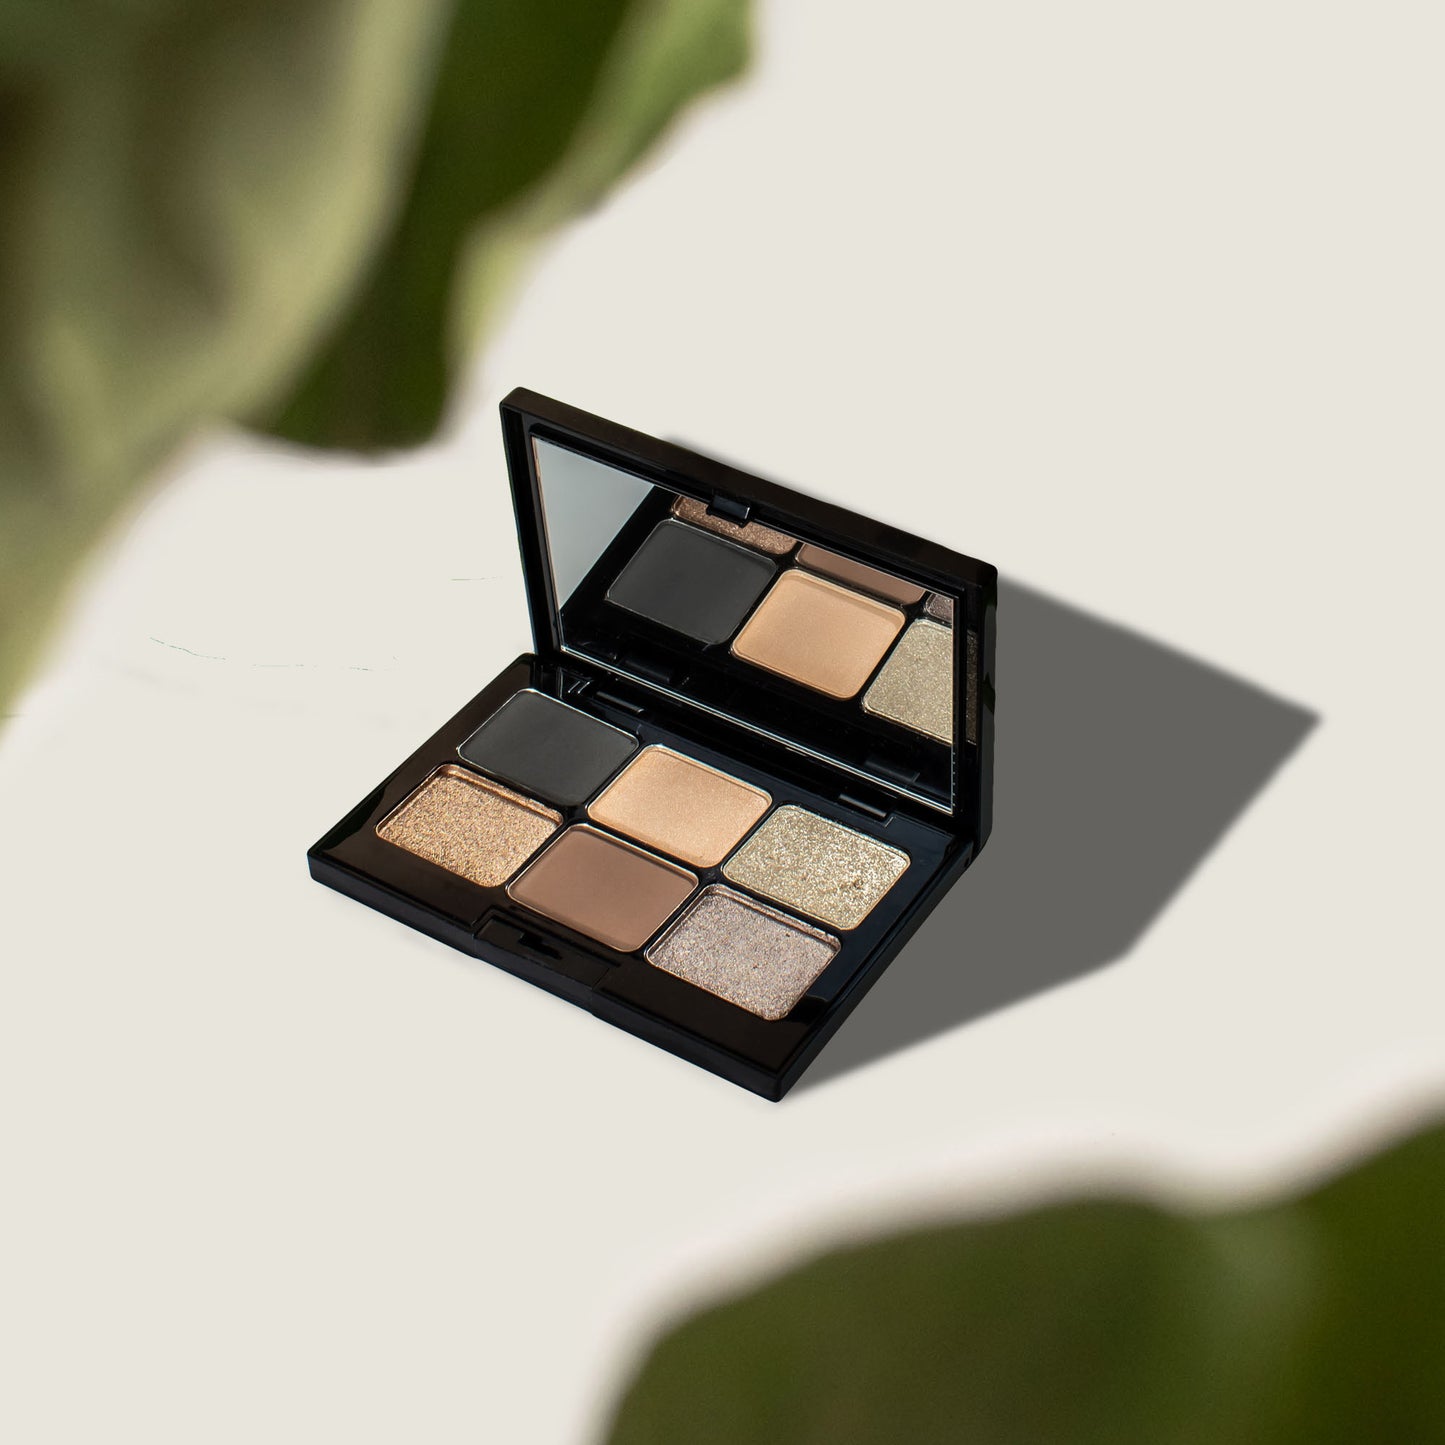 Transform your eye look with our Dark Storm Eyeshadow Palette. These mesmerizing colors add dimension and are crease resistant, for a flawless finish. Achieve any look with ease.